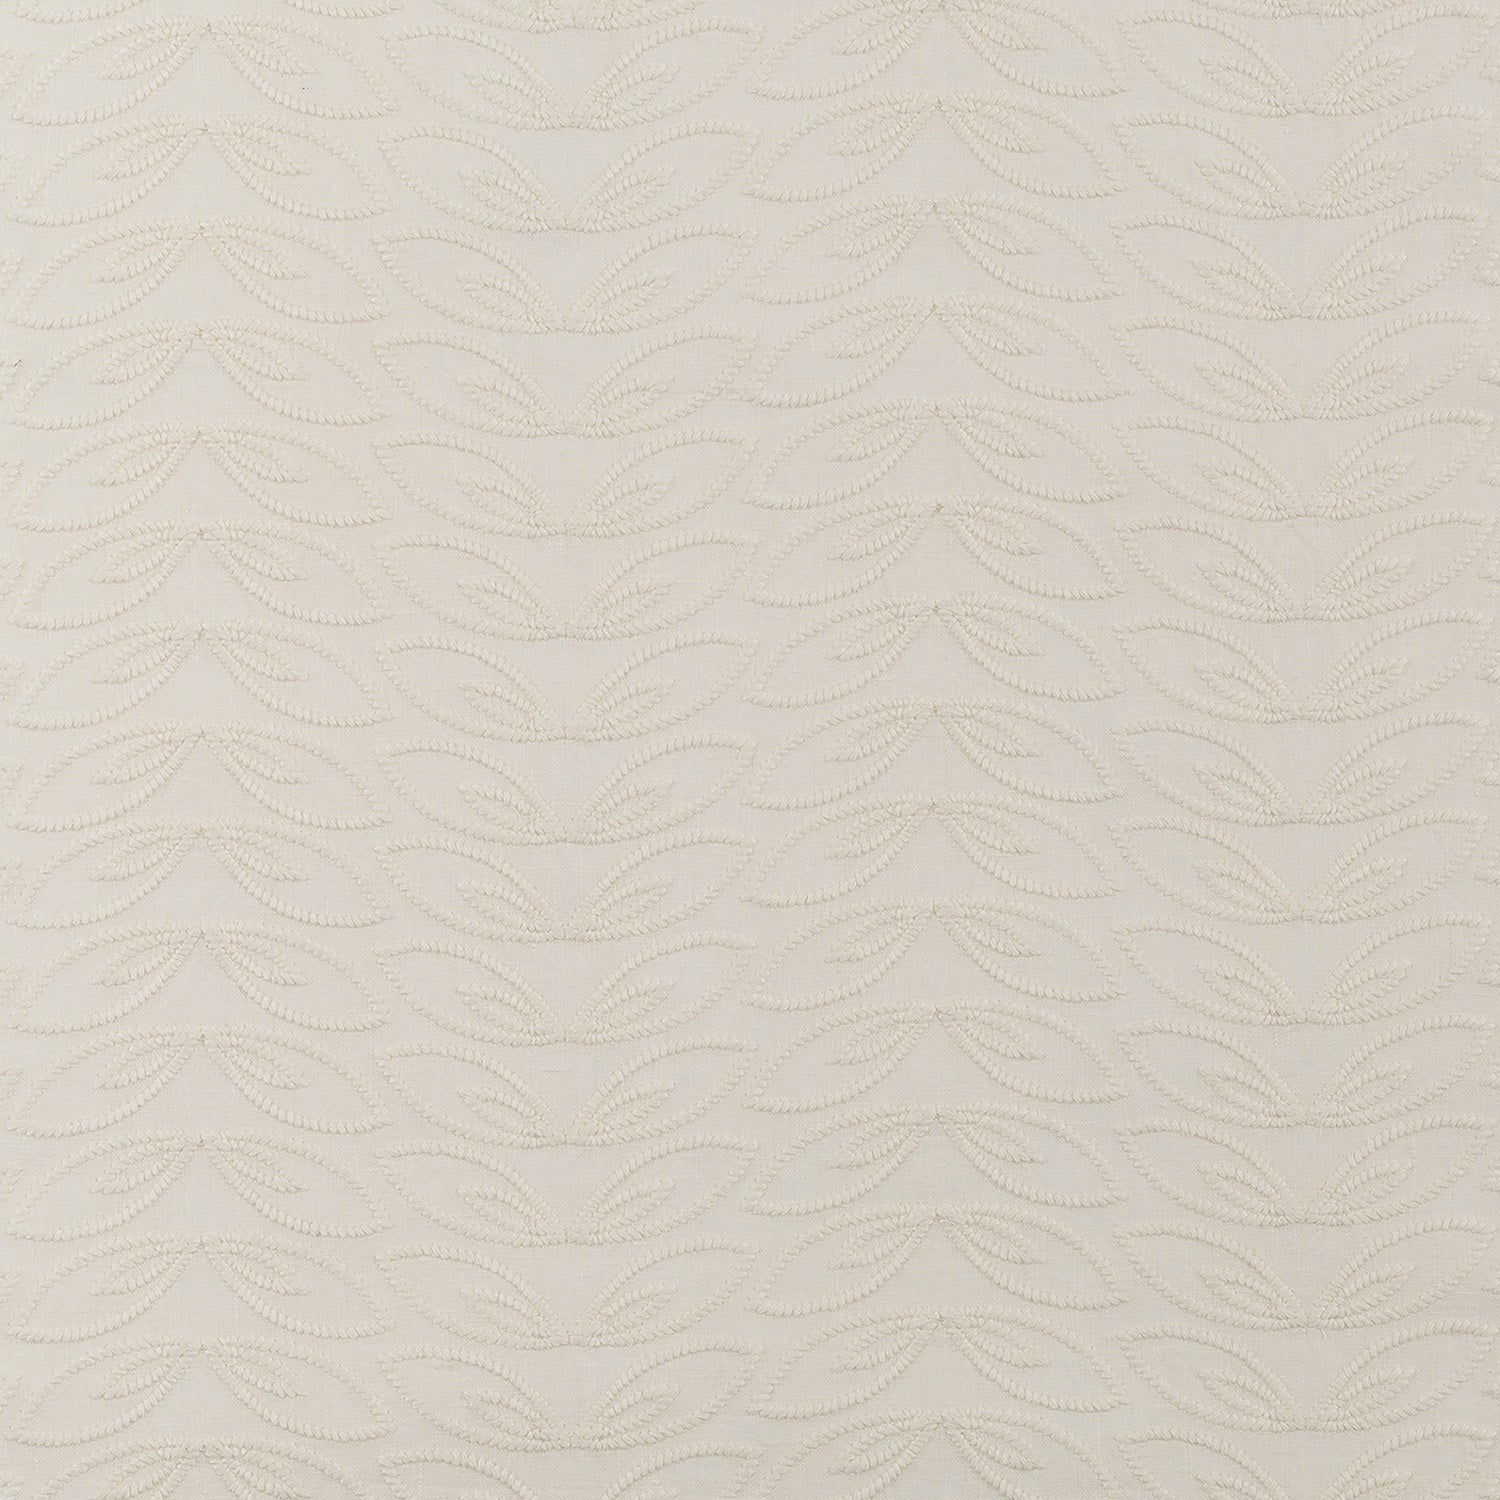 Fabric with an embroidered linear leaf print in cream on a cream field.